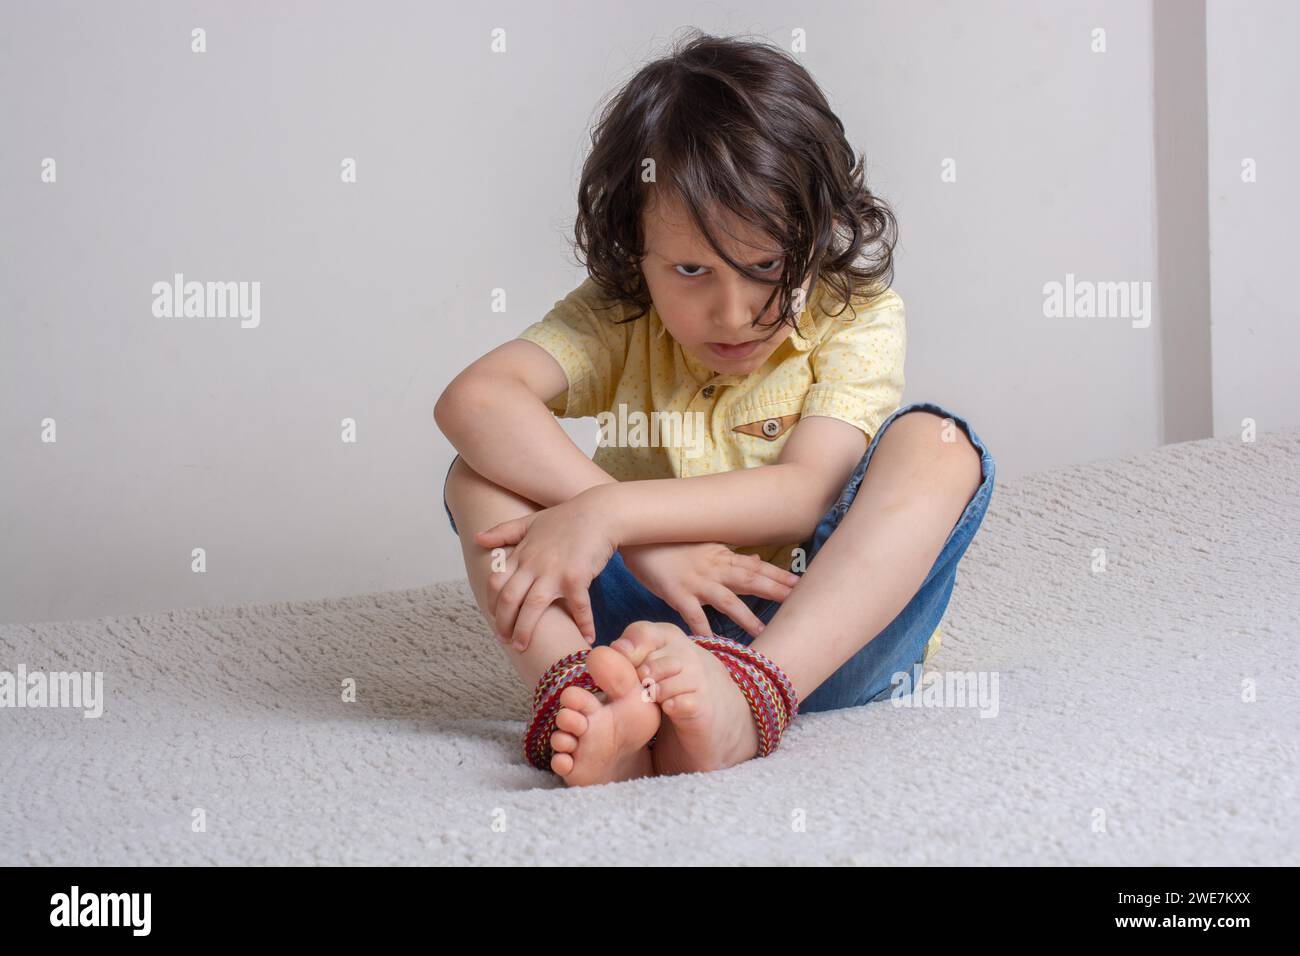 Little boy with Feet tied up with rope in emotional stress Stock Photo